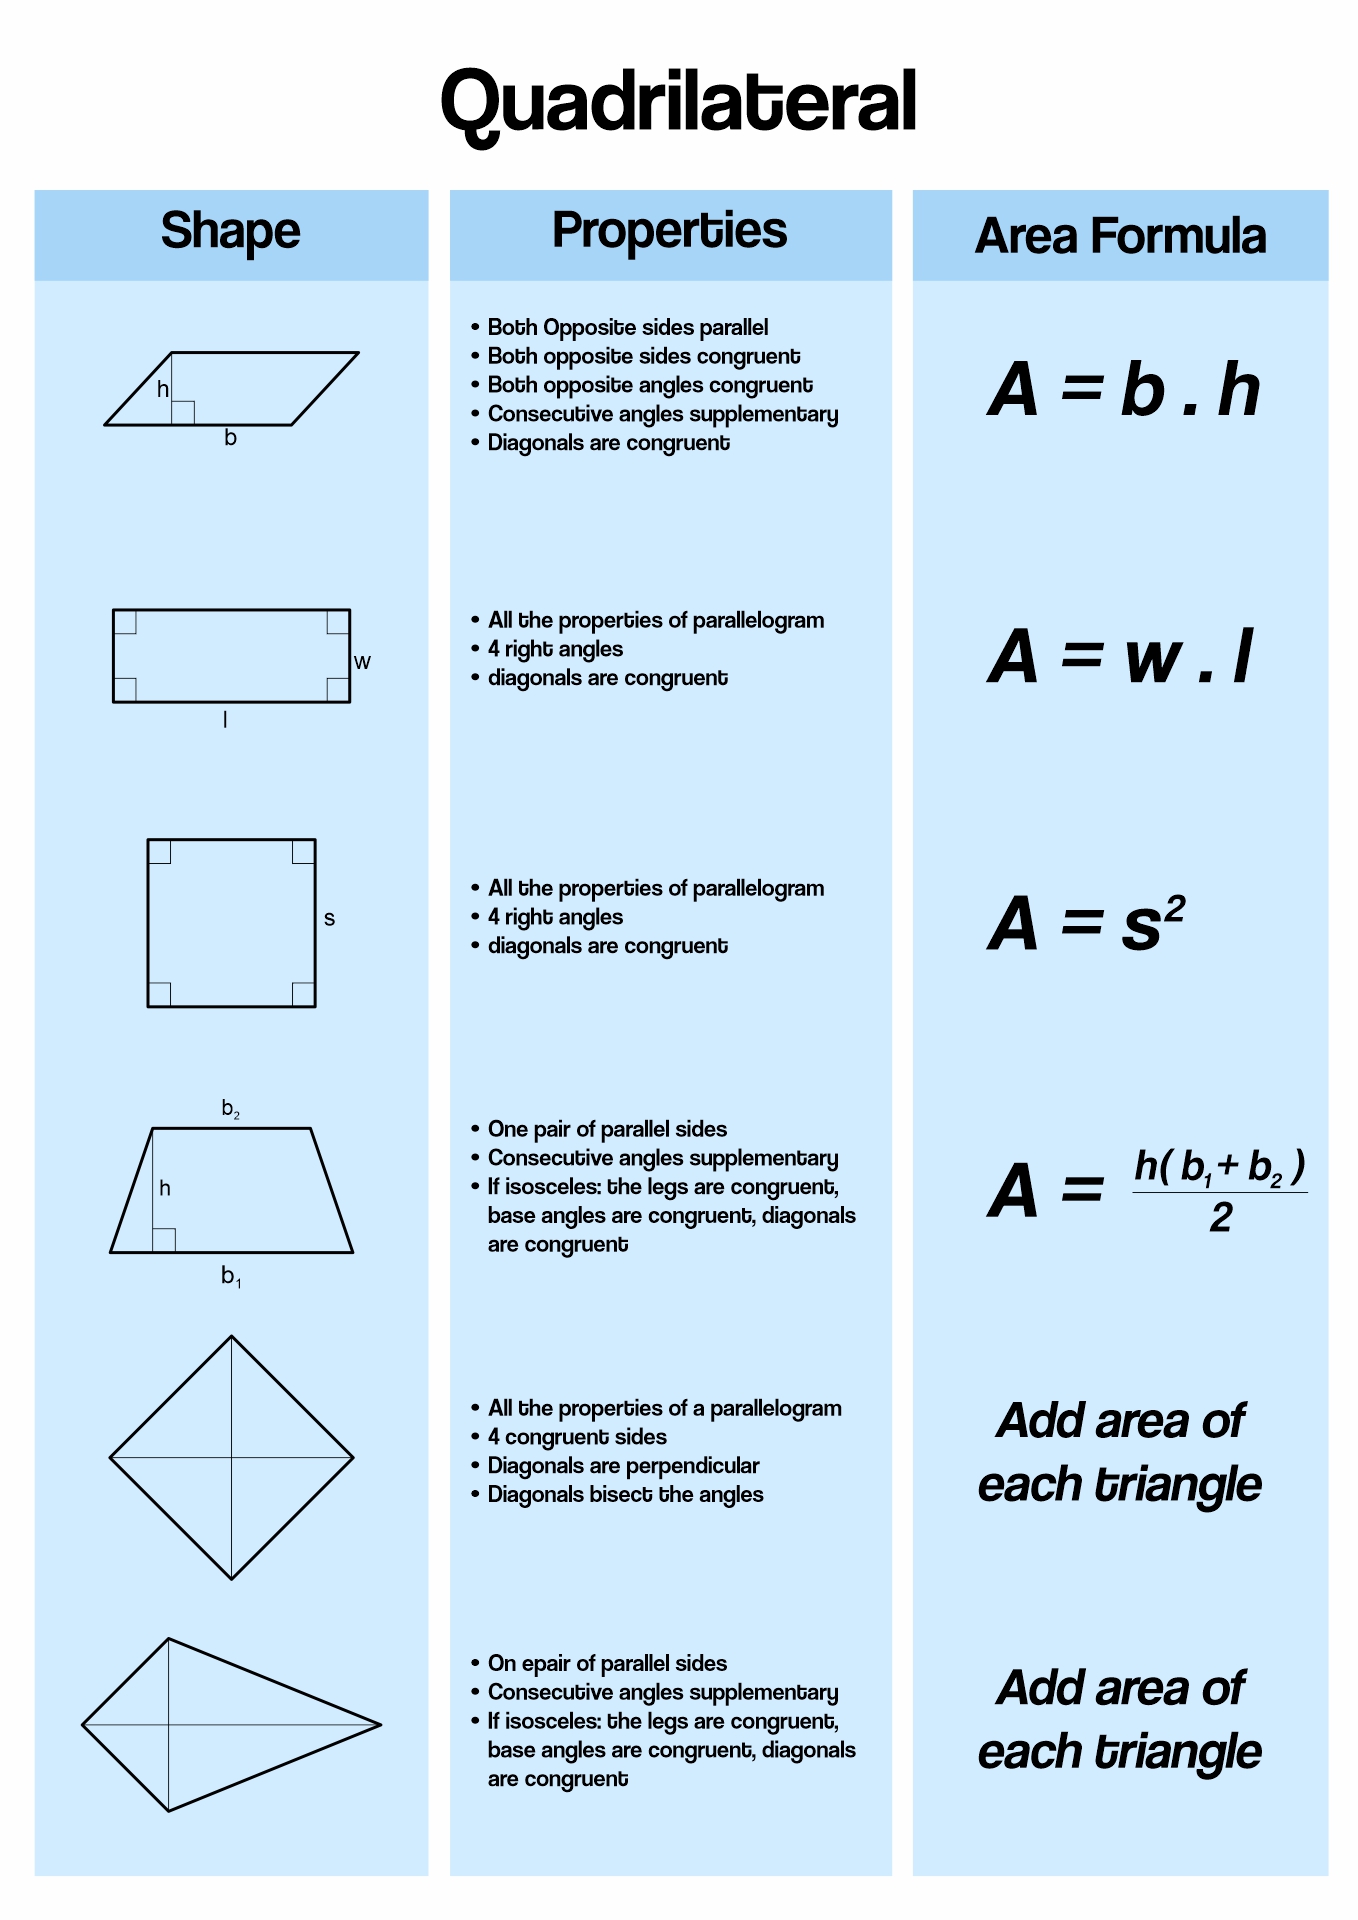 Quadrilateral Properties Chart Image